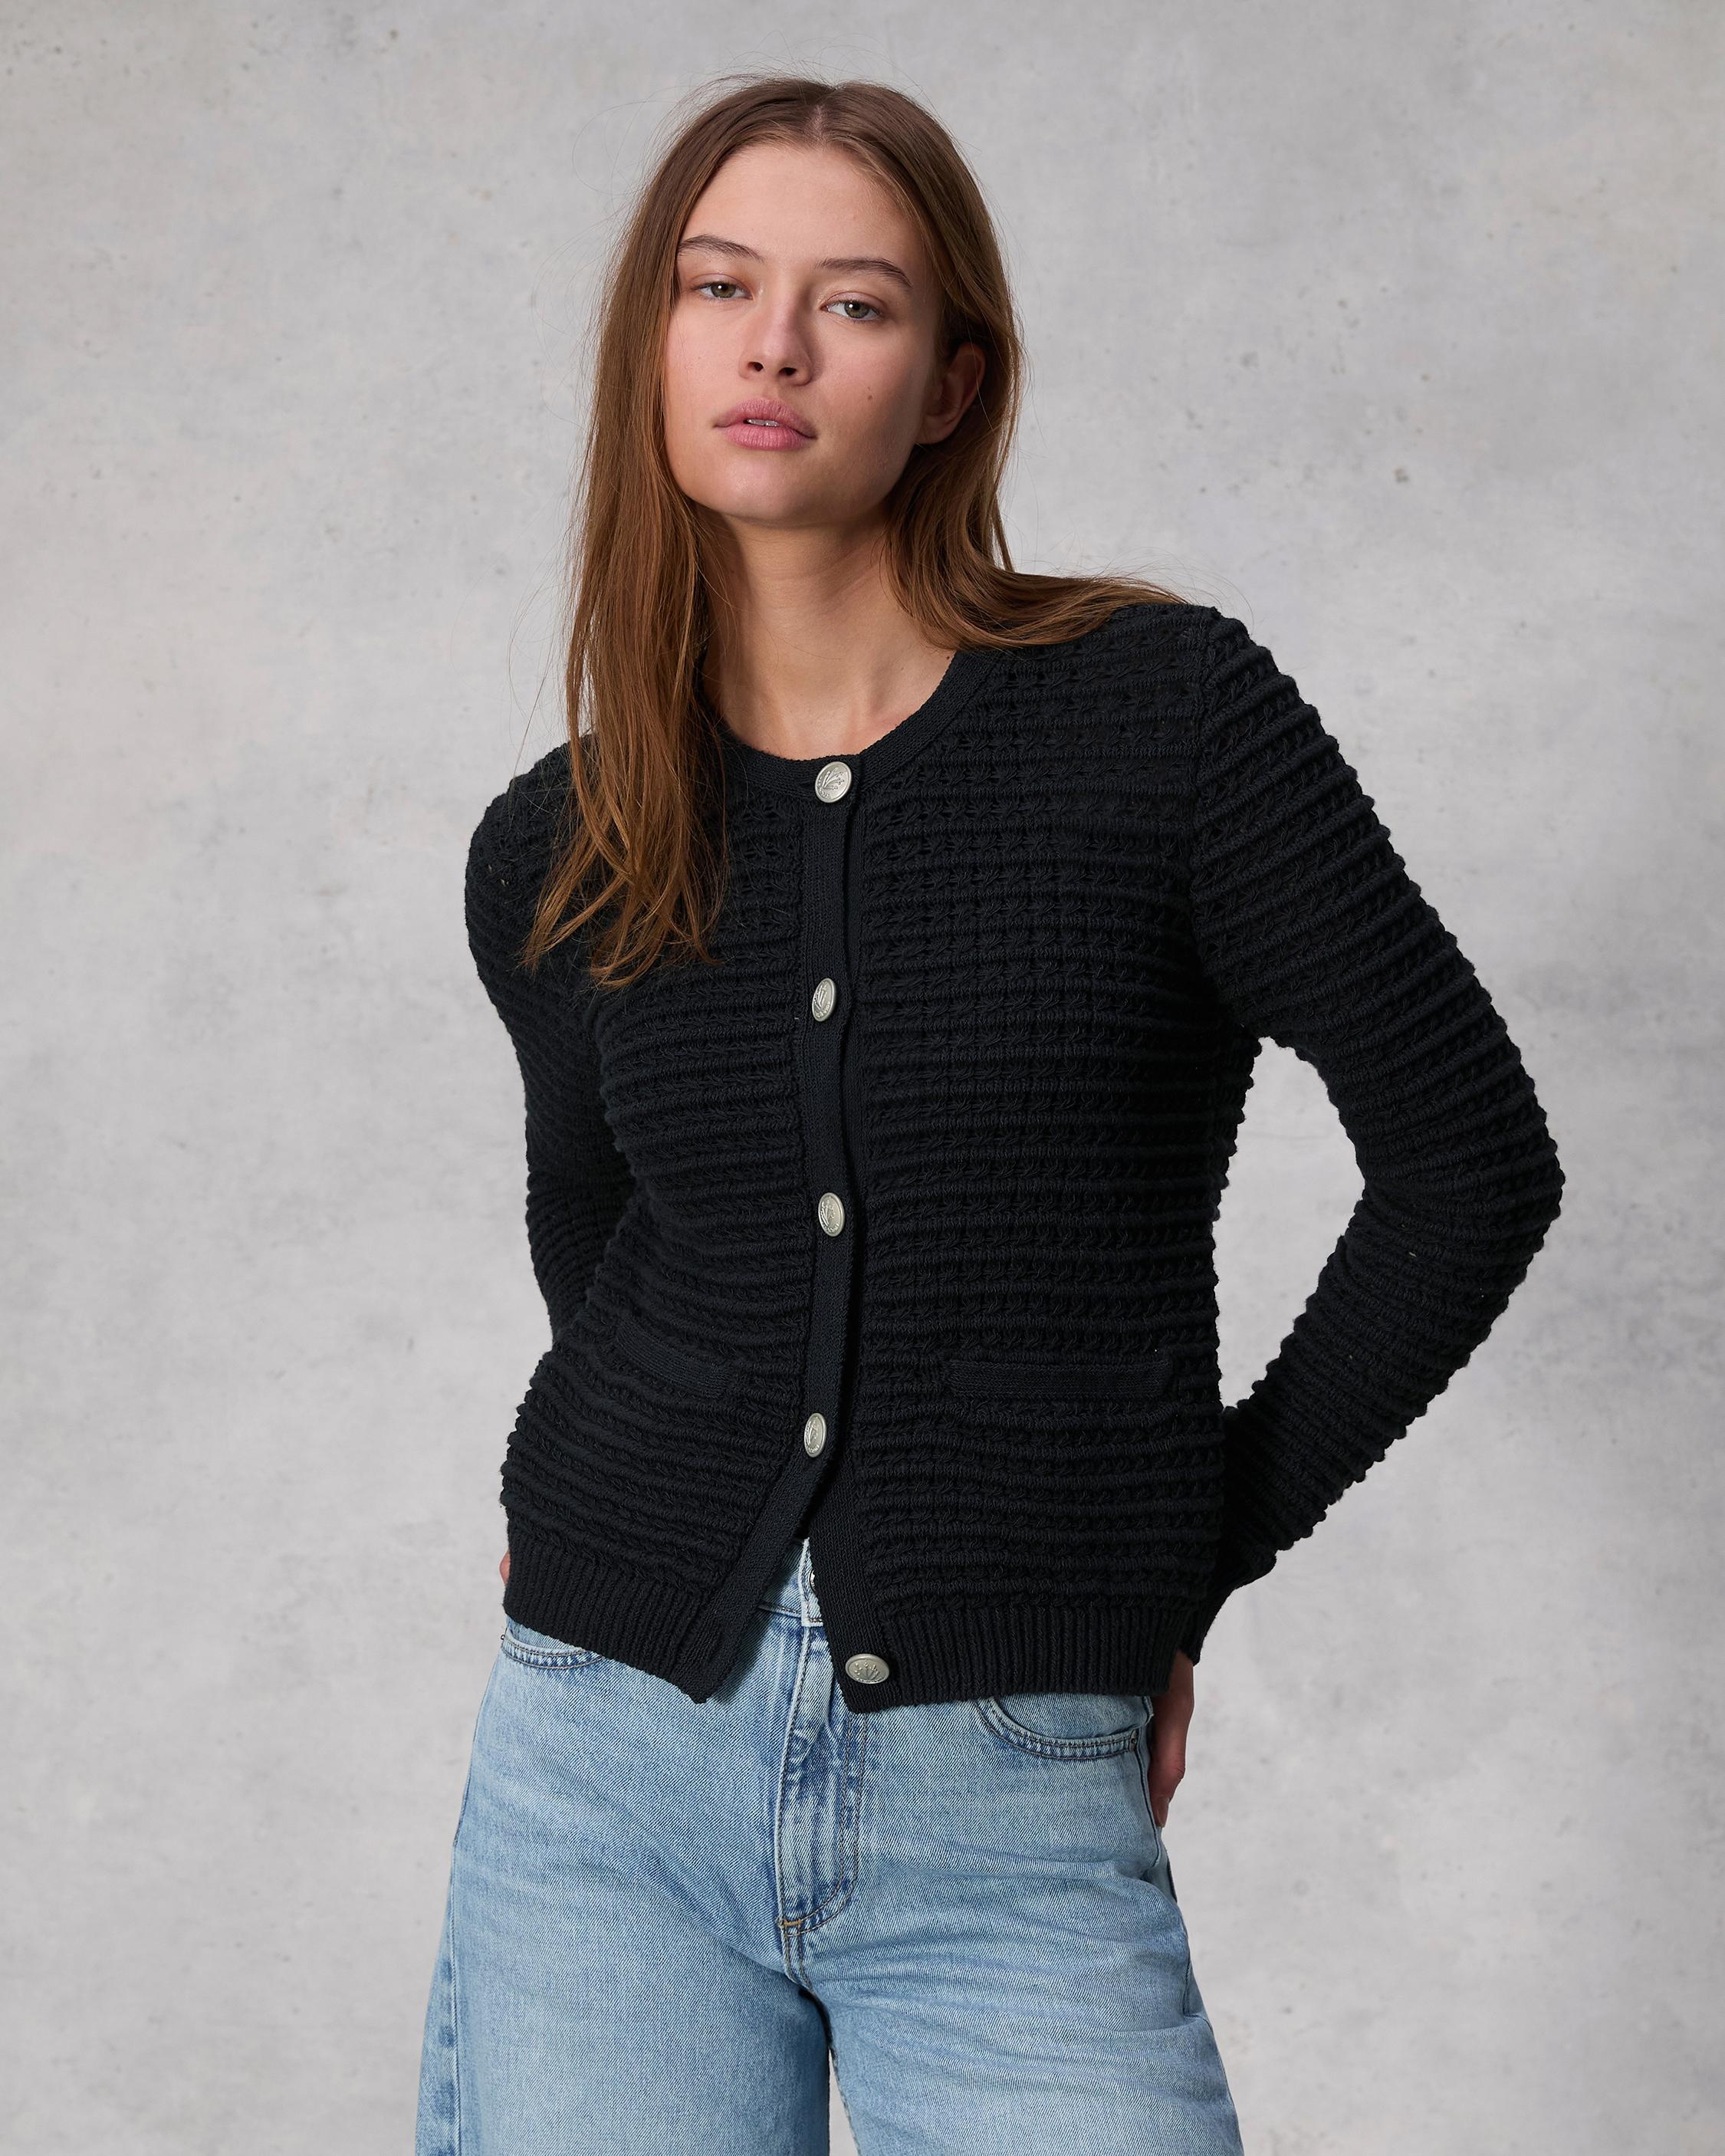 Marlee Cotton Cardigan
Relaxed Fit - 3